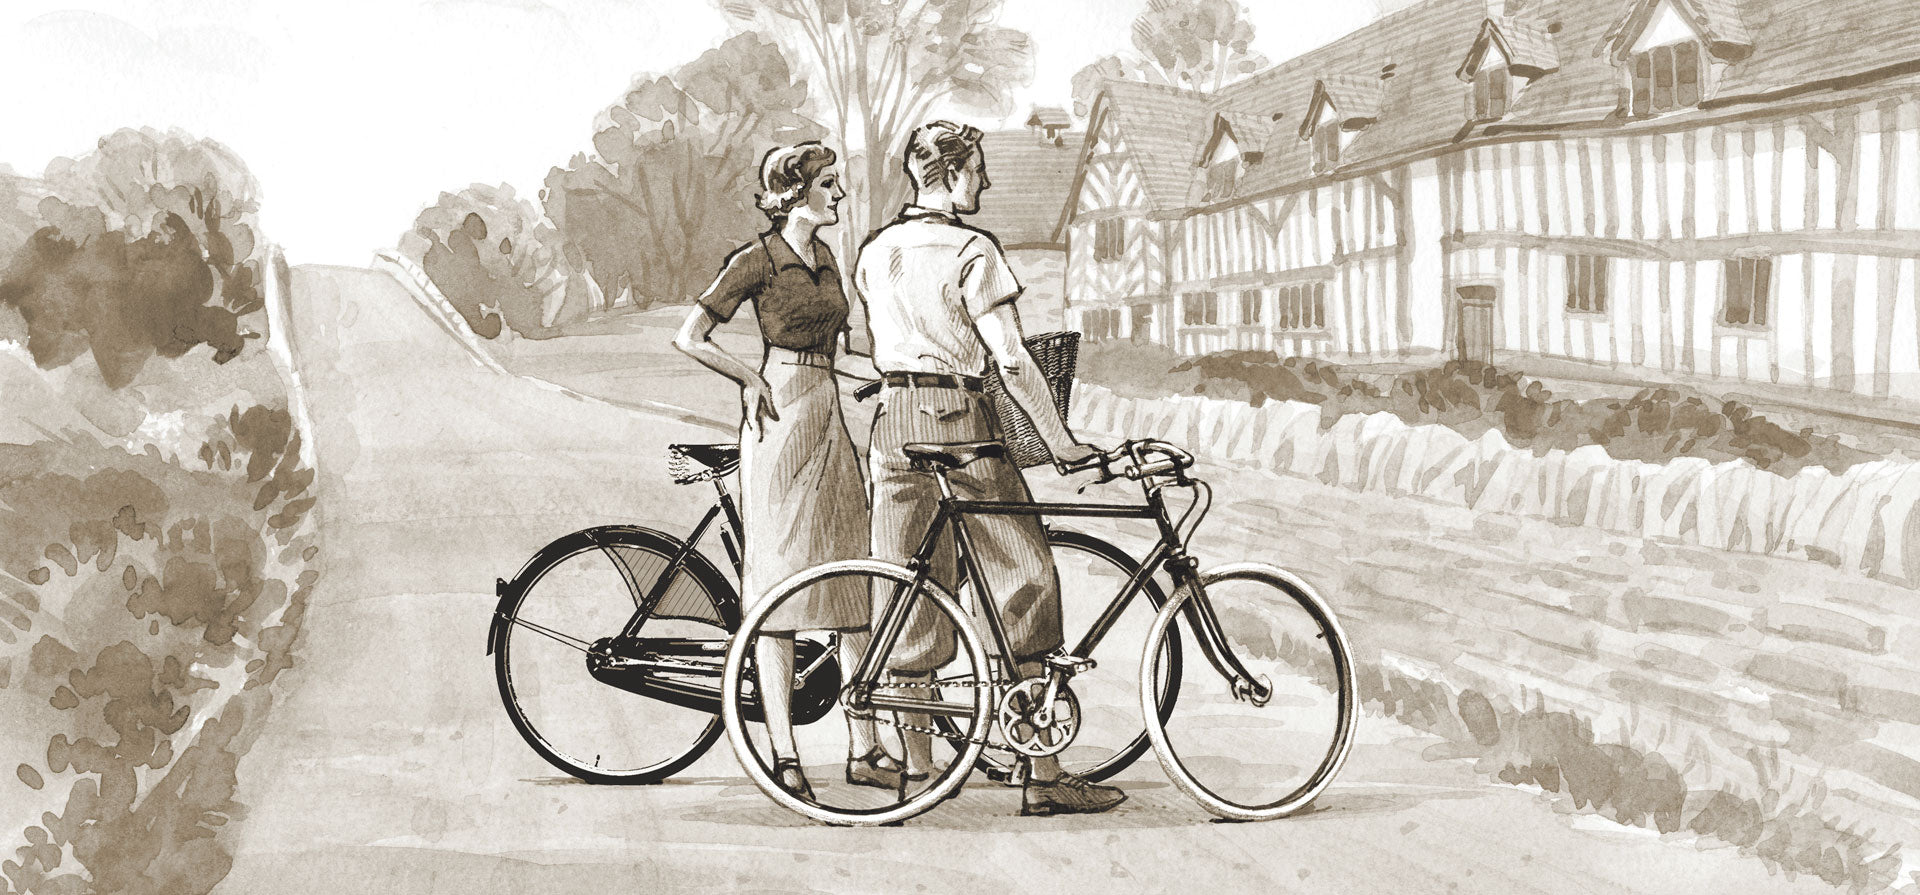 Sepia toned watercolour of a couple in 1950s with their Pashley bicycles outside Mary Arden's house in the village of Wilmcote.